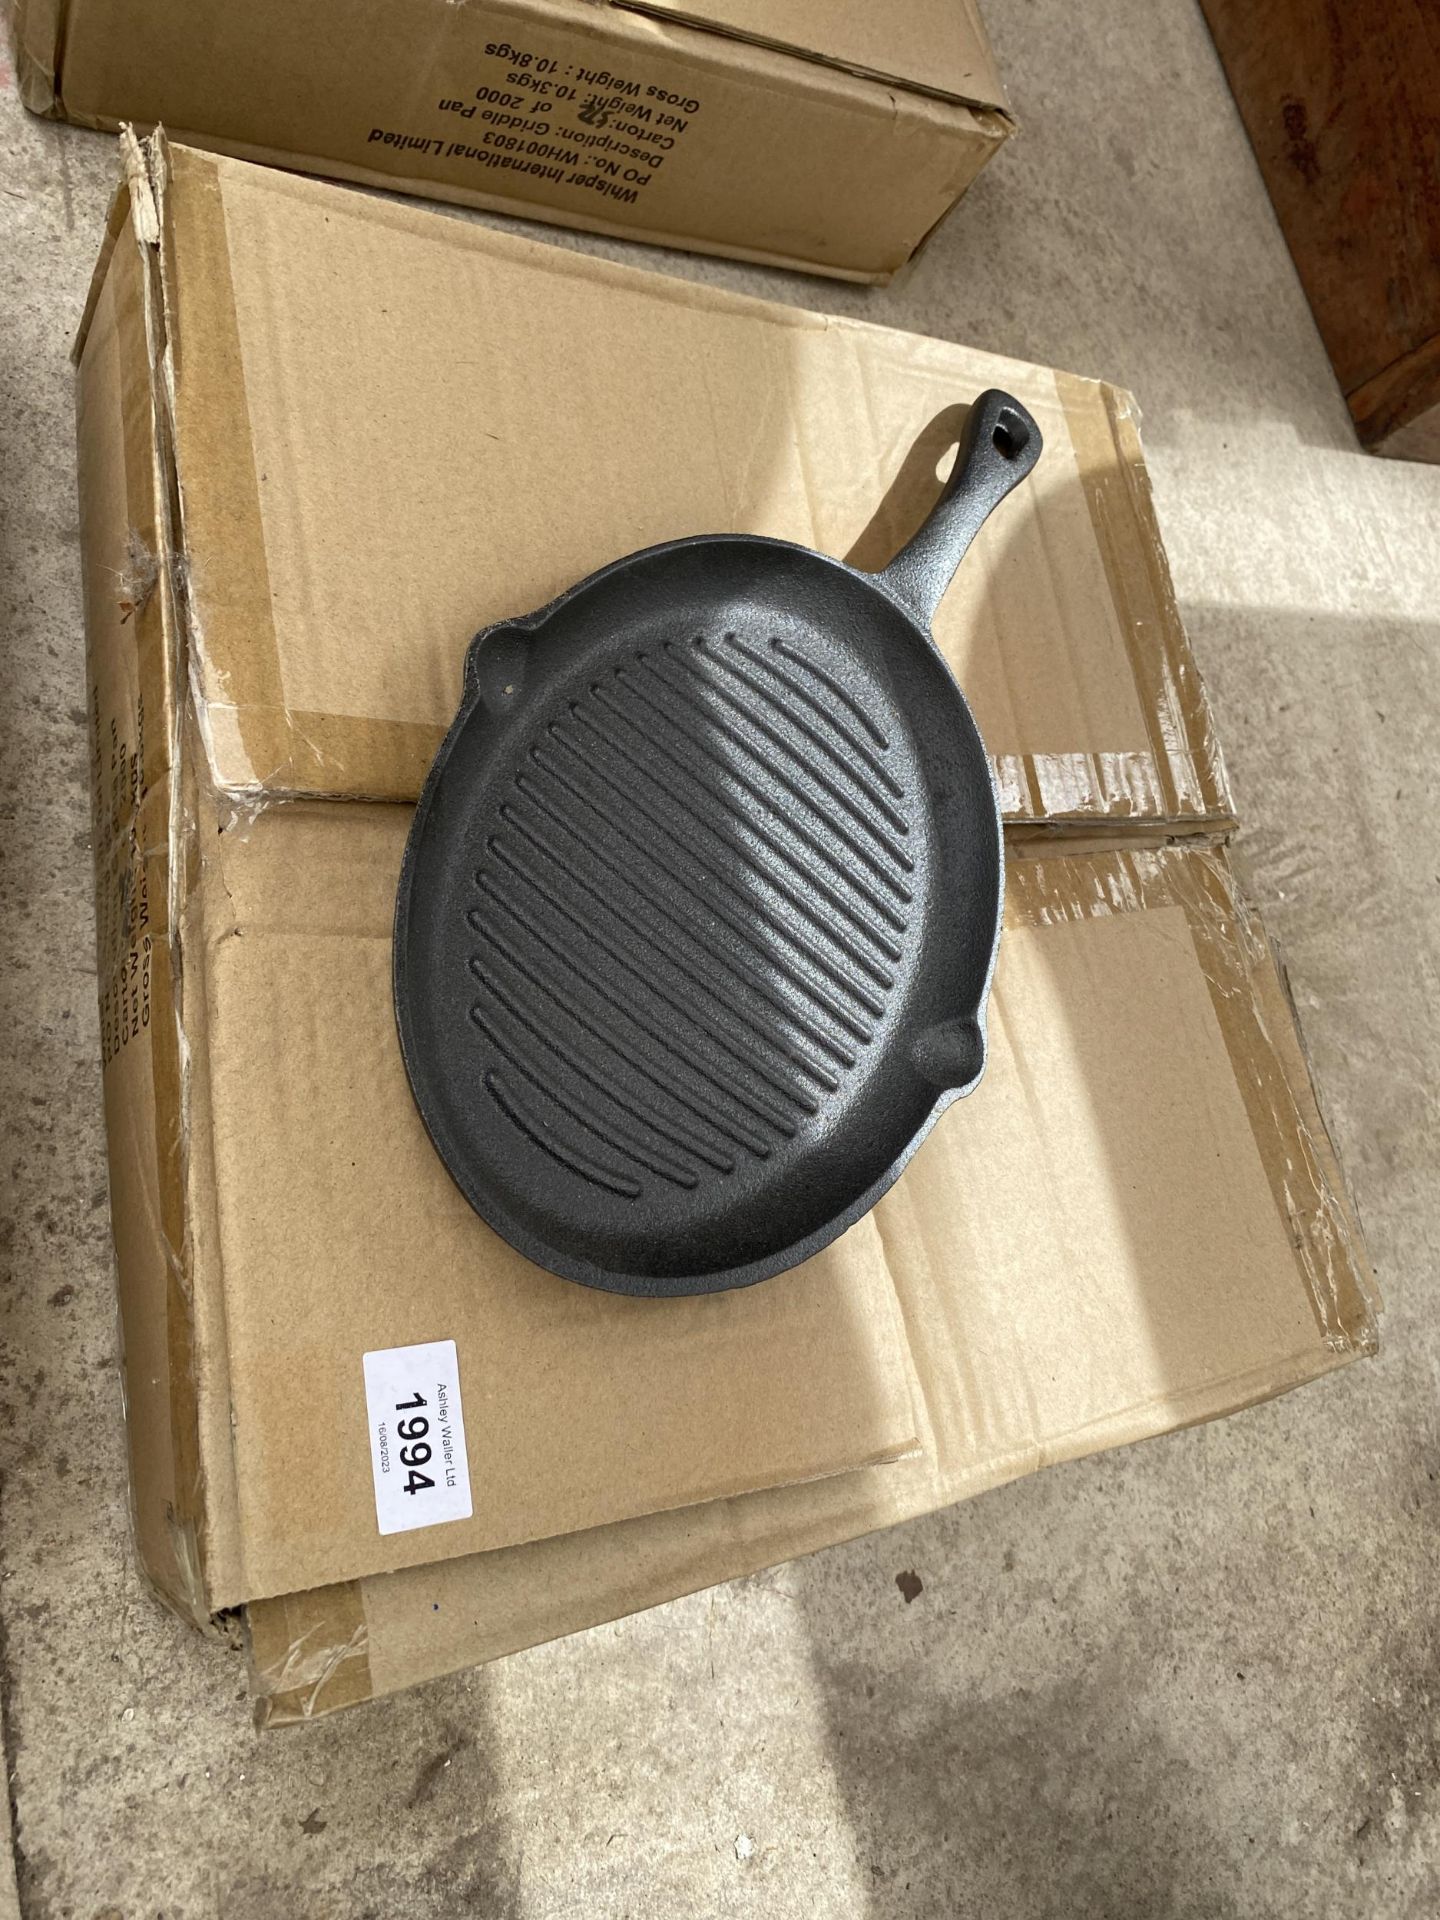 APPROXIMATELY 10 CAST IRON SKILLET PANS